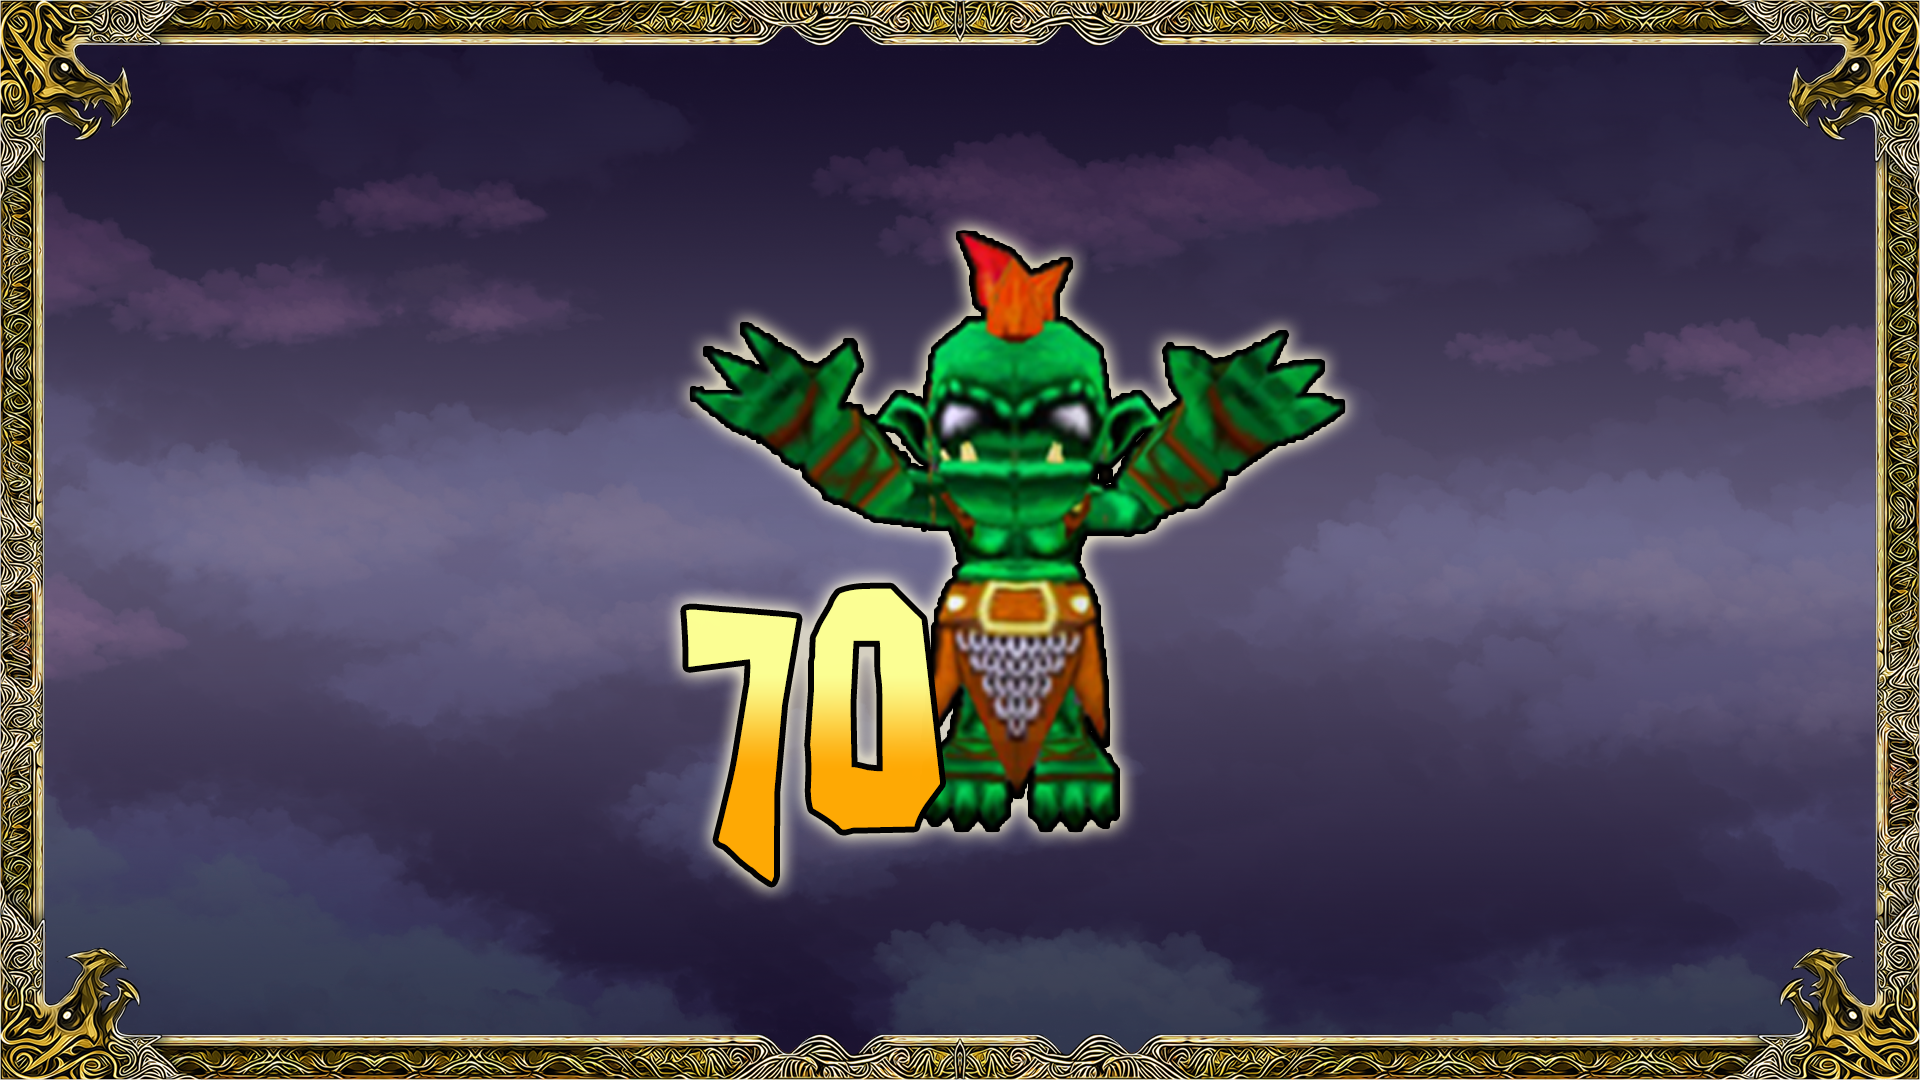 Icon for Defeat 70 trolls